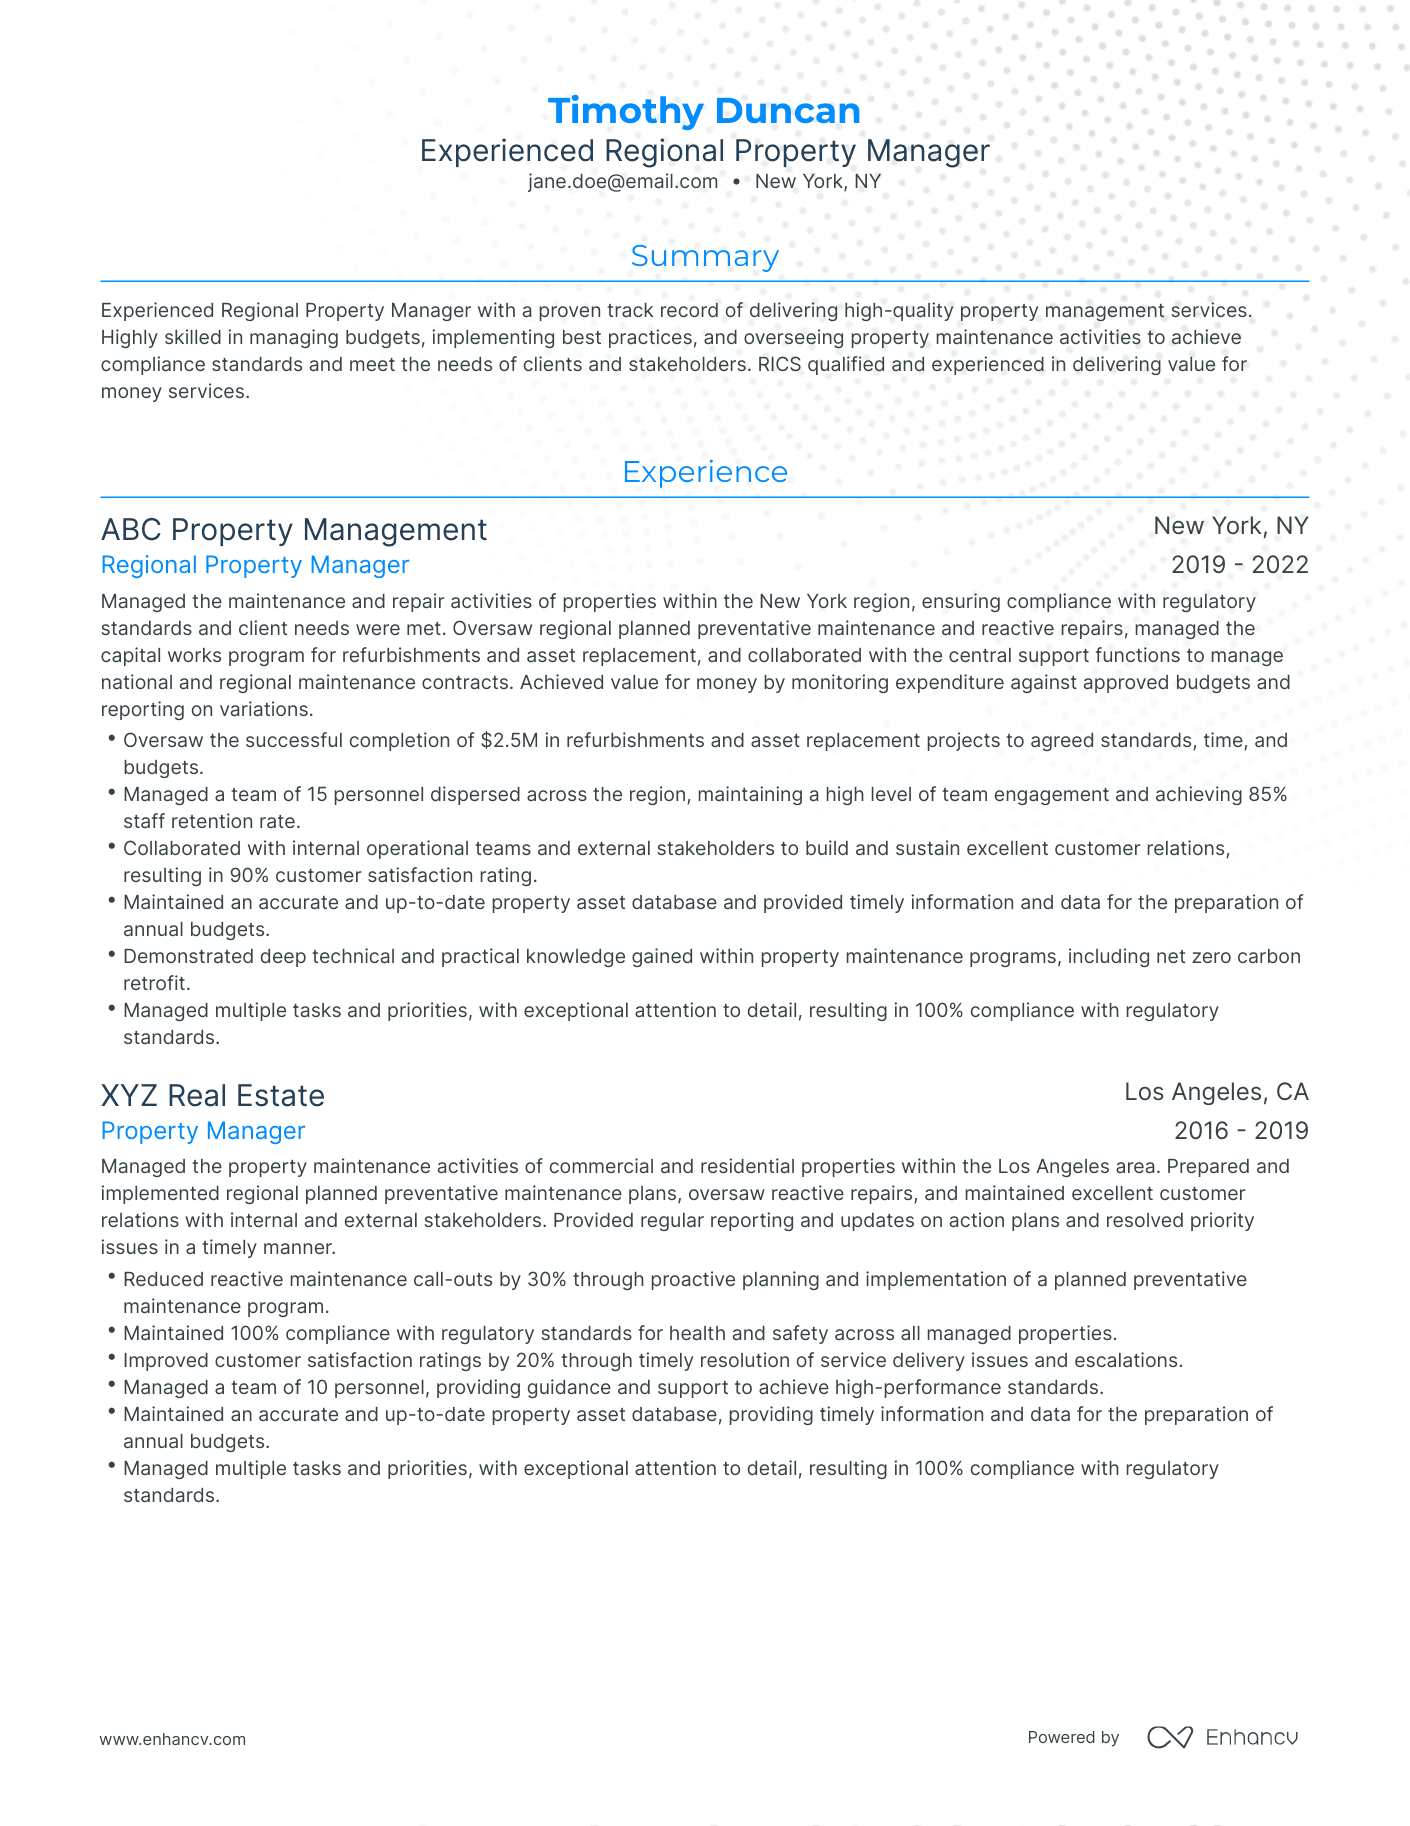 Traditional Regional Property Manager Resume Template